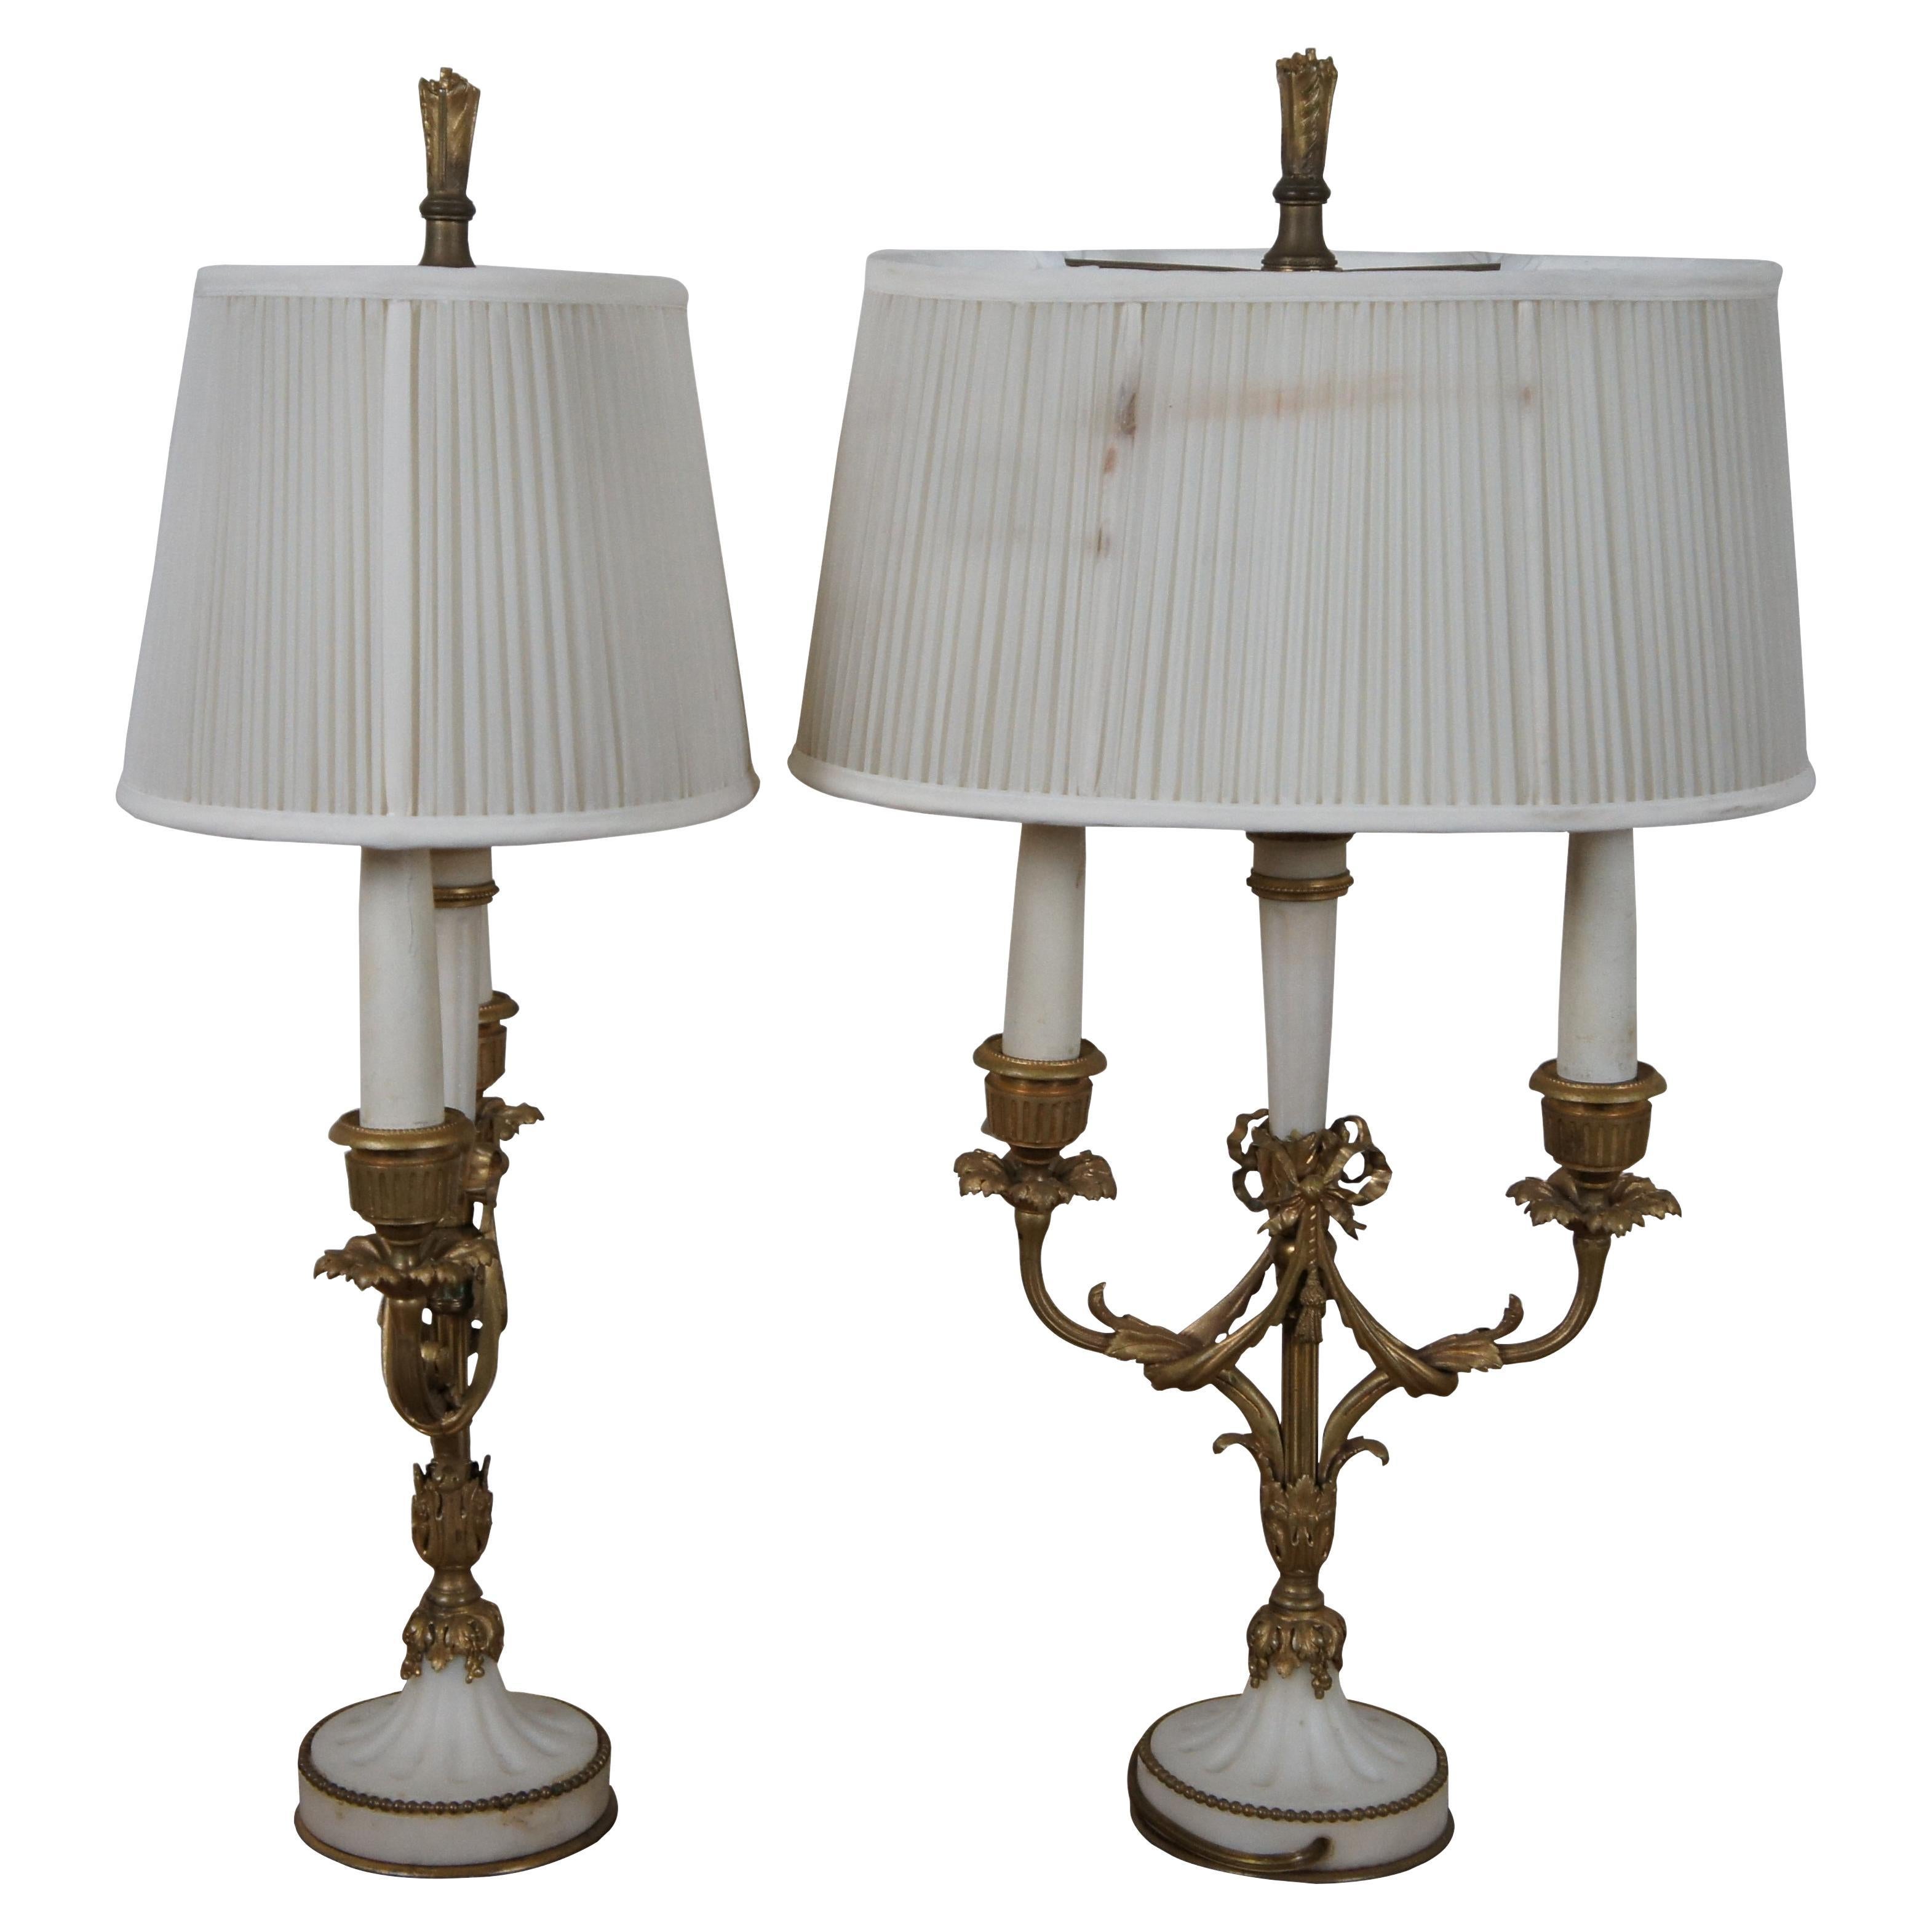 Pair of antique French neoclassical bouillotte two light table lamps featuring white Alabaster stone accents with intricate fluted gilt bronze design. The body and arms feature an acanthus floral and ribbon motif, with faux wood candle holders /